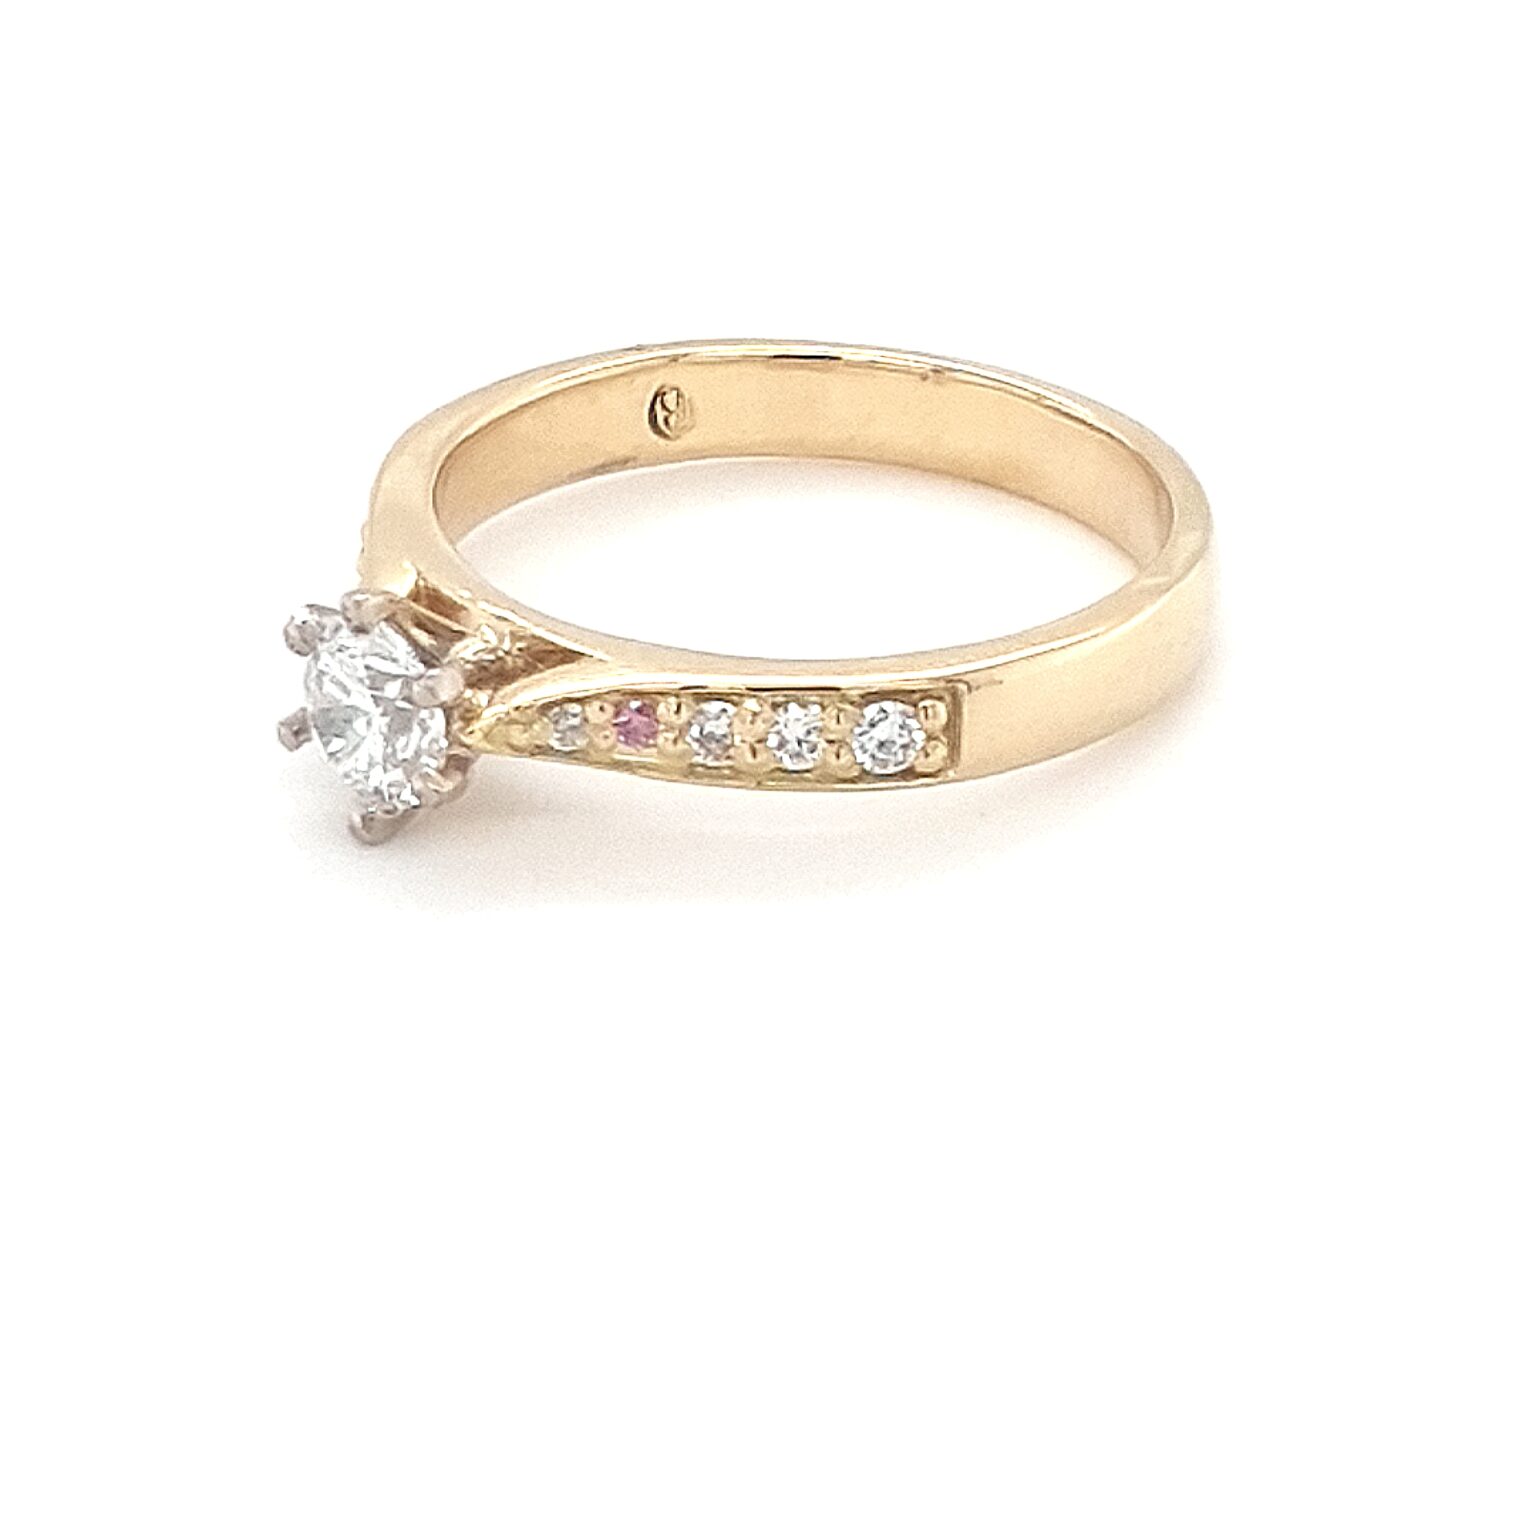 Leon Baker 18K Yellow Gold White and Pink Diamond Solitaire Engagement Ring_1